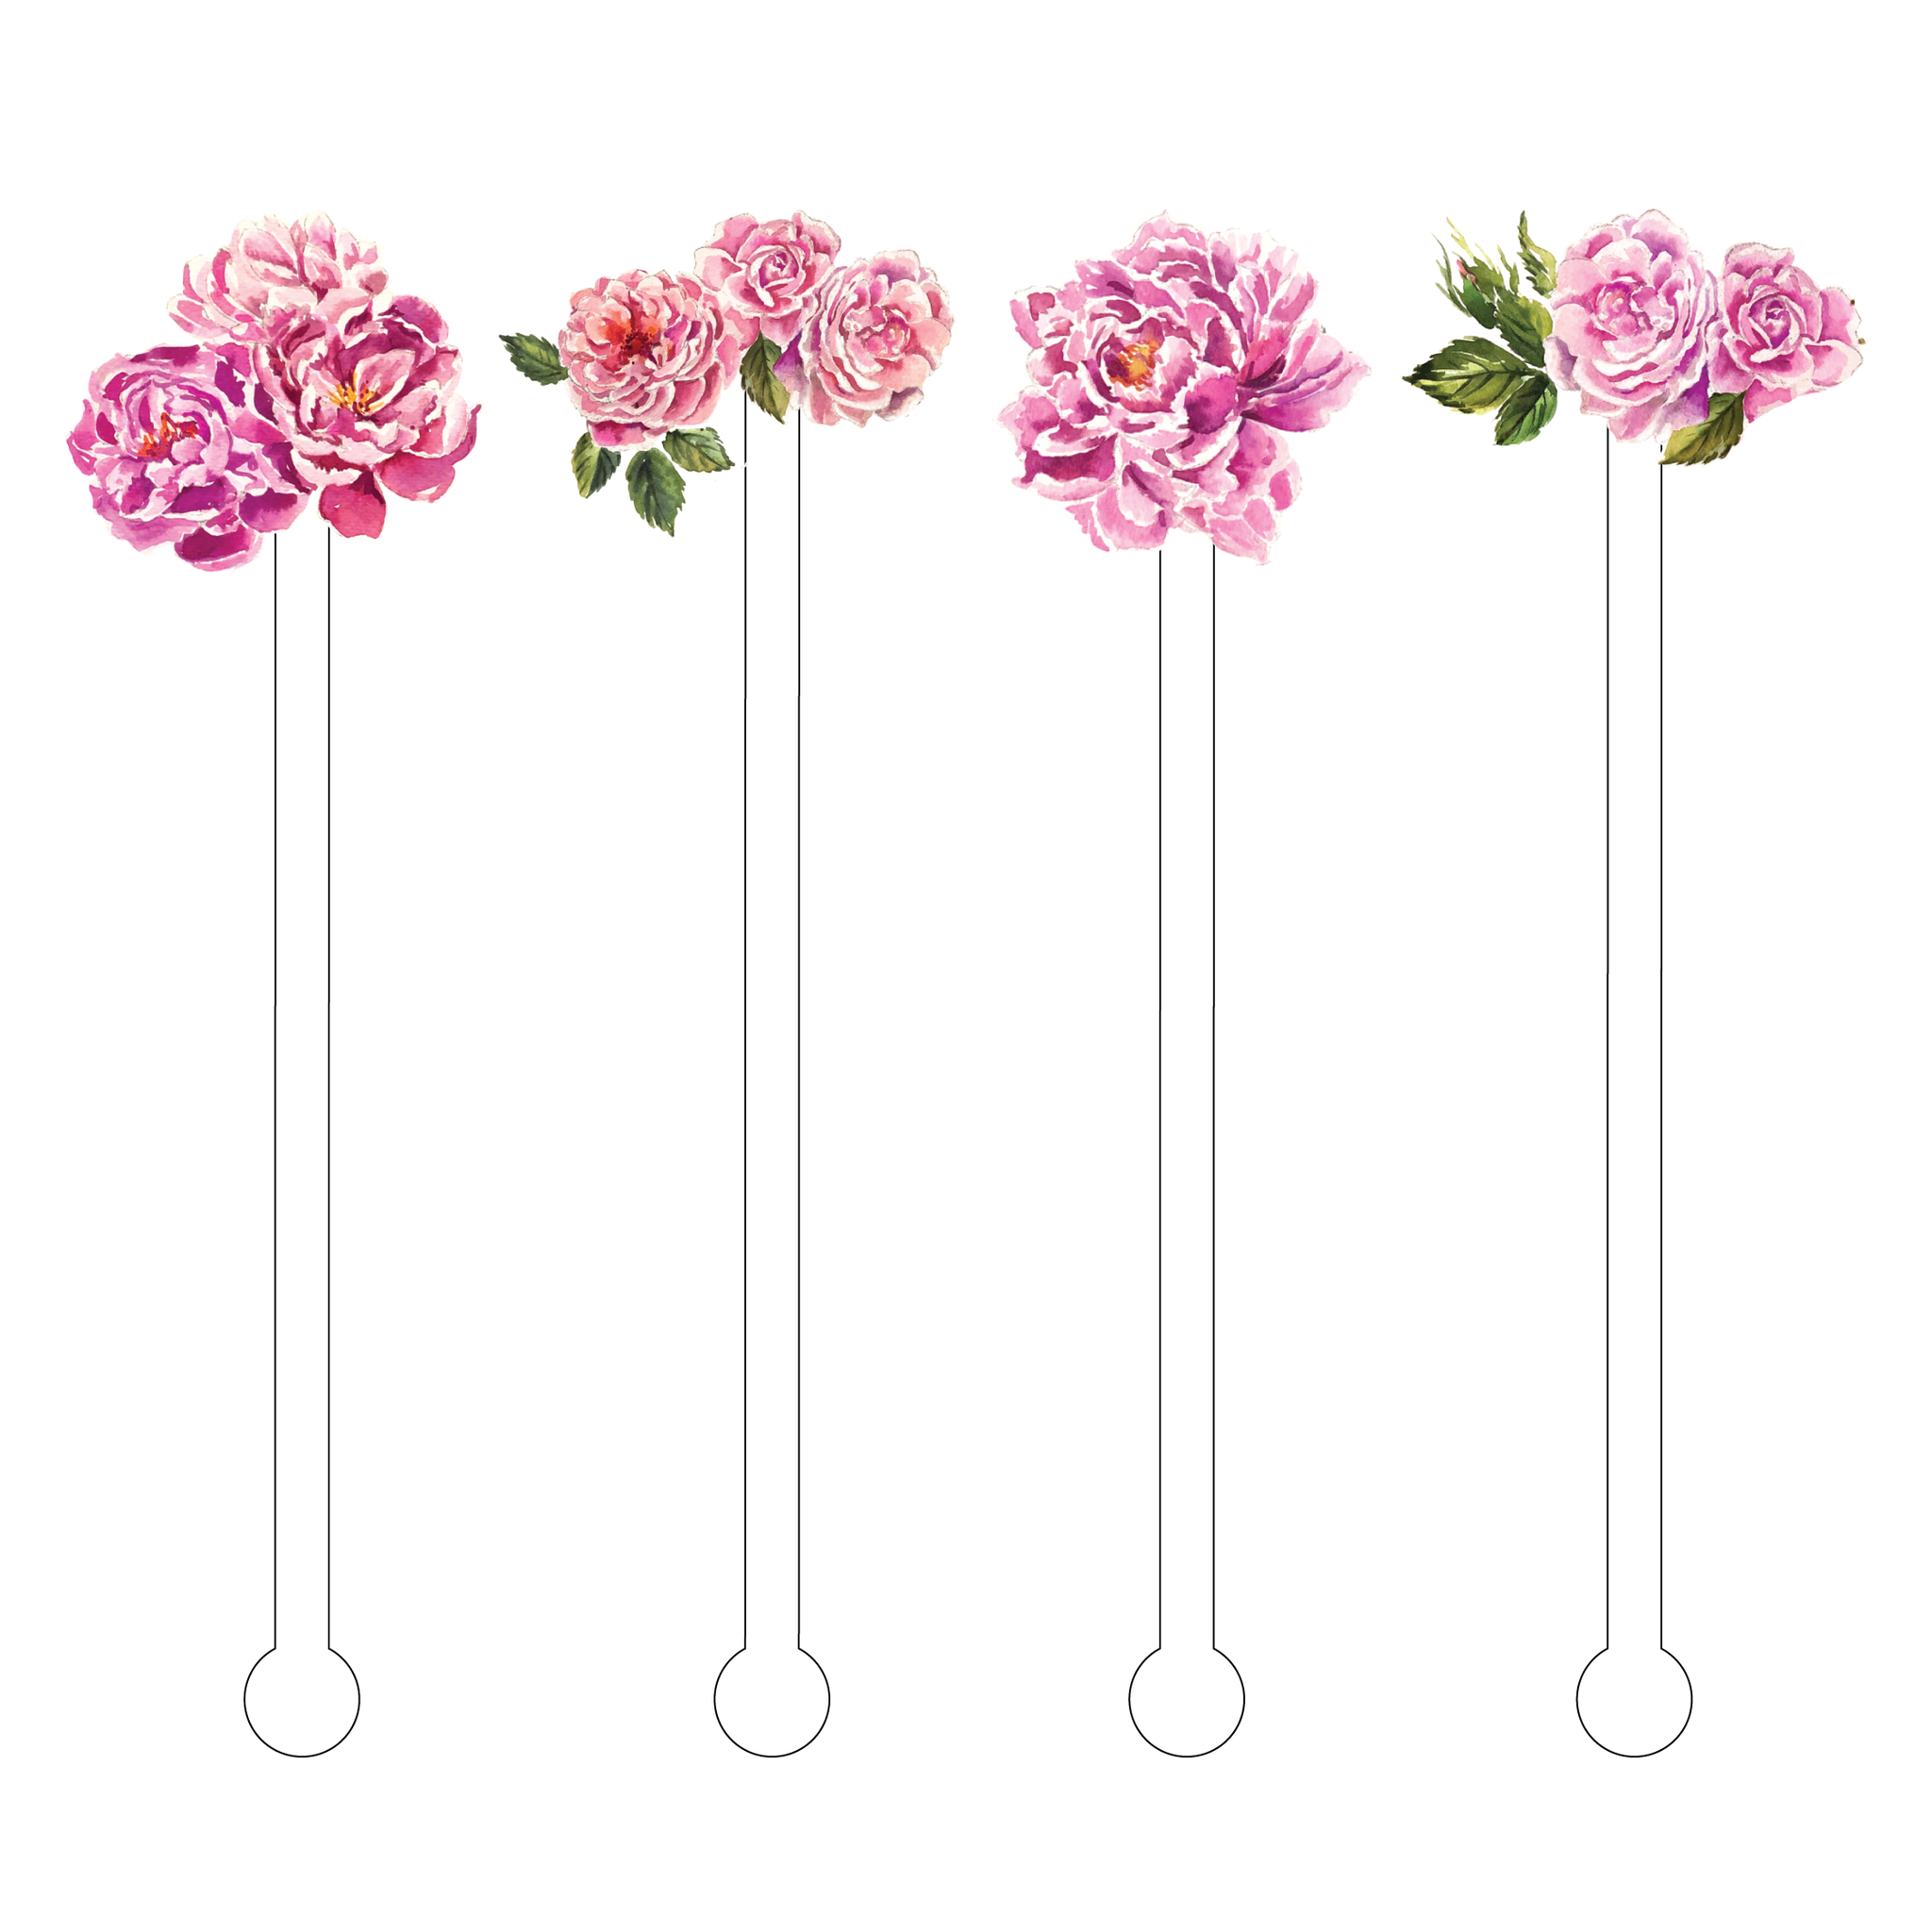 PRETTY IN PINK BLOOMS ACRYLIC STIR STICKS COMBO